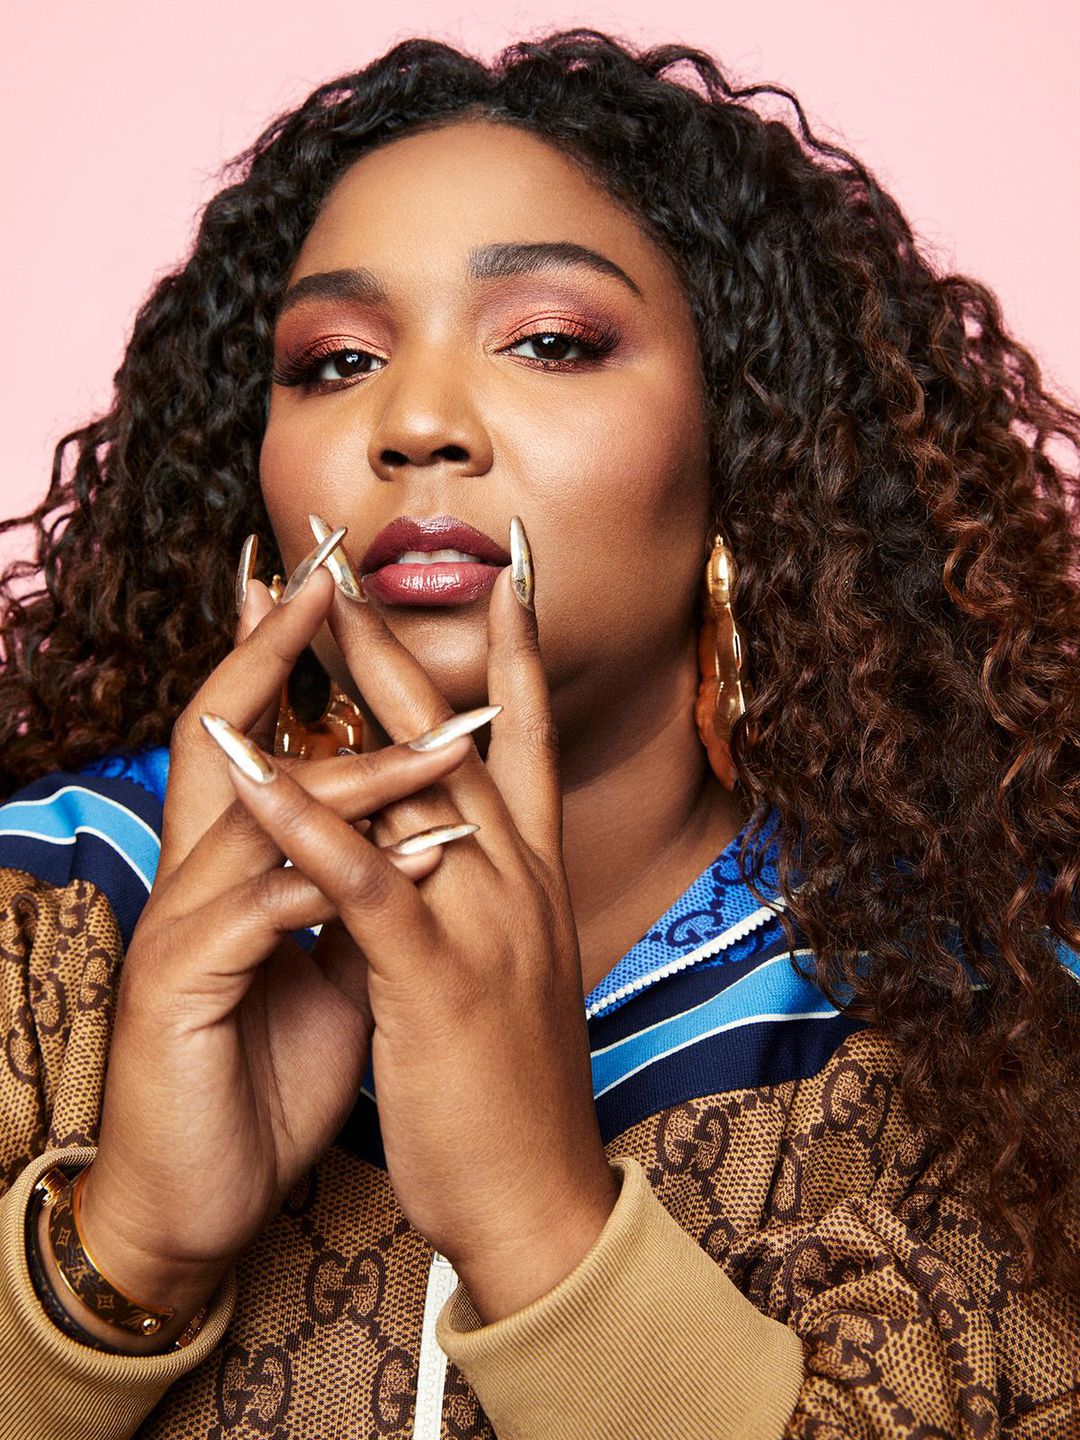 Lizzo young age